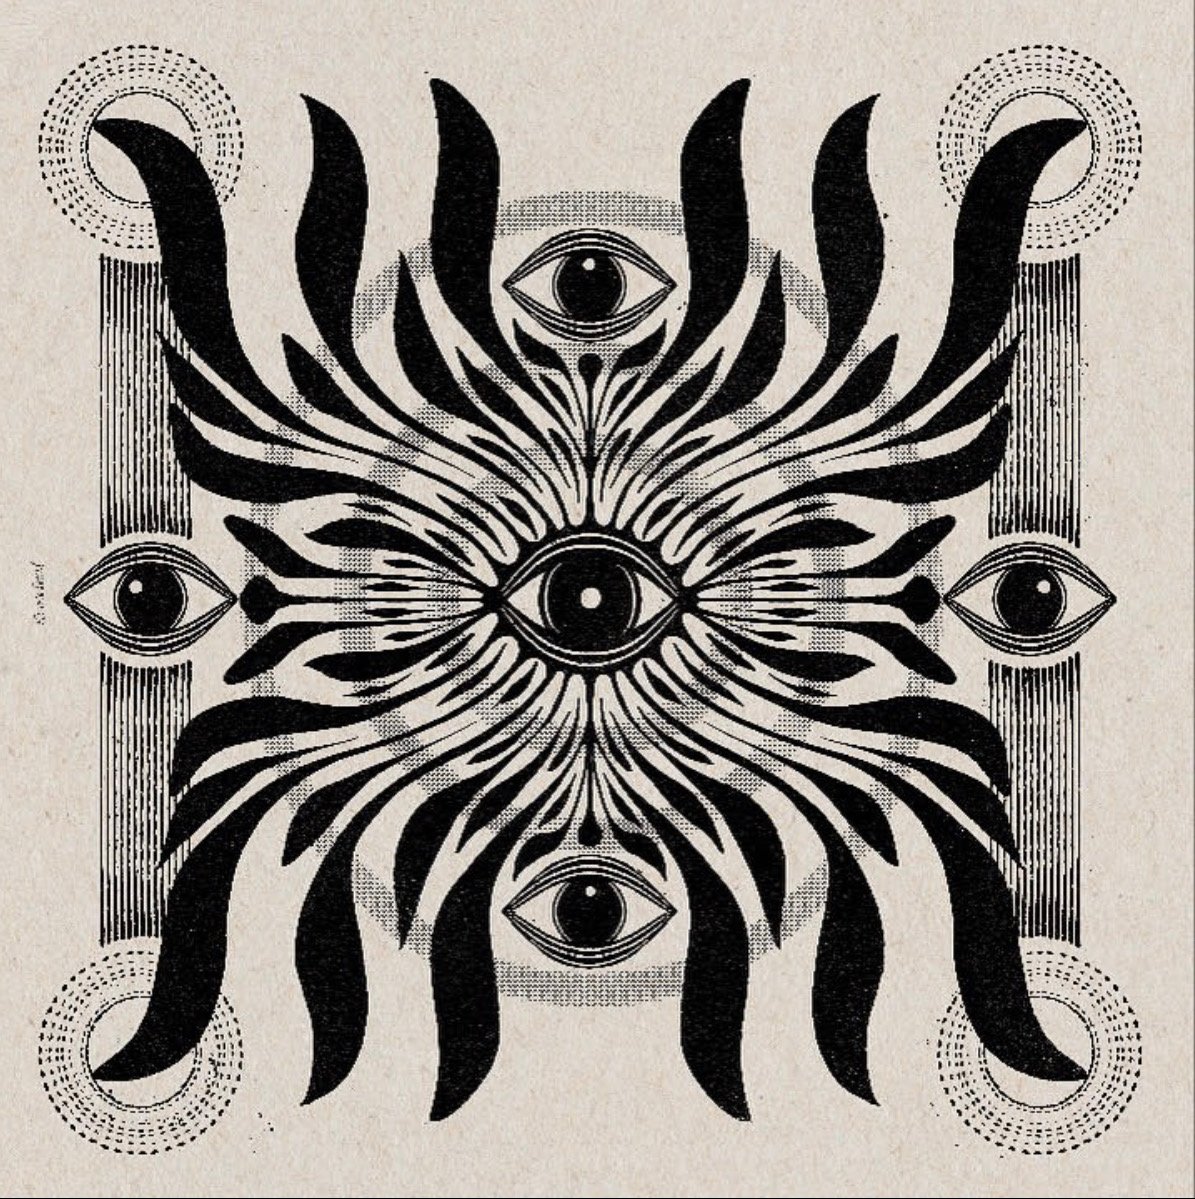 ‘THE ADAPTATIONS OF THE EYE’ PRINT | IREFAELS